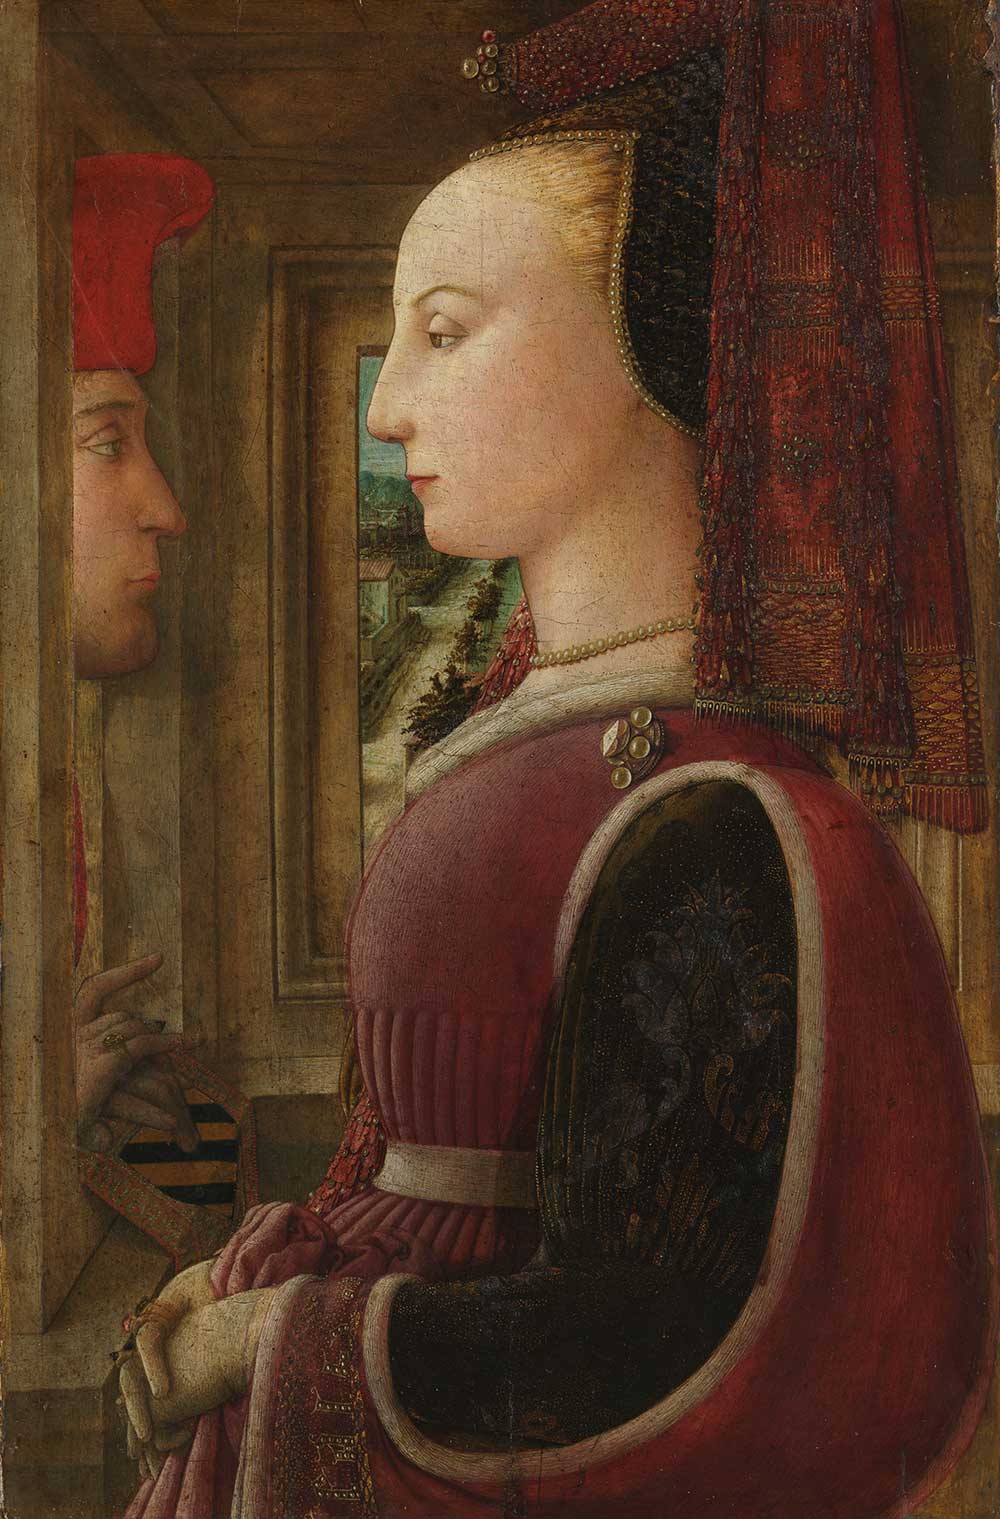 Portrait of a Woman with a Man at a Casement, by Fra Filippo Lippi, c. 1440.